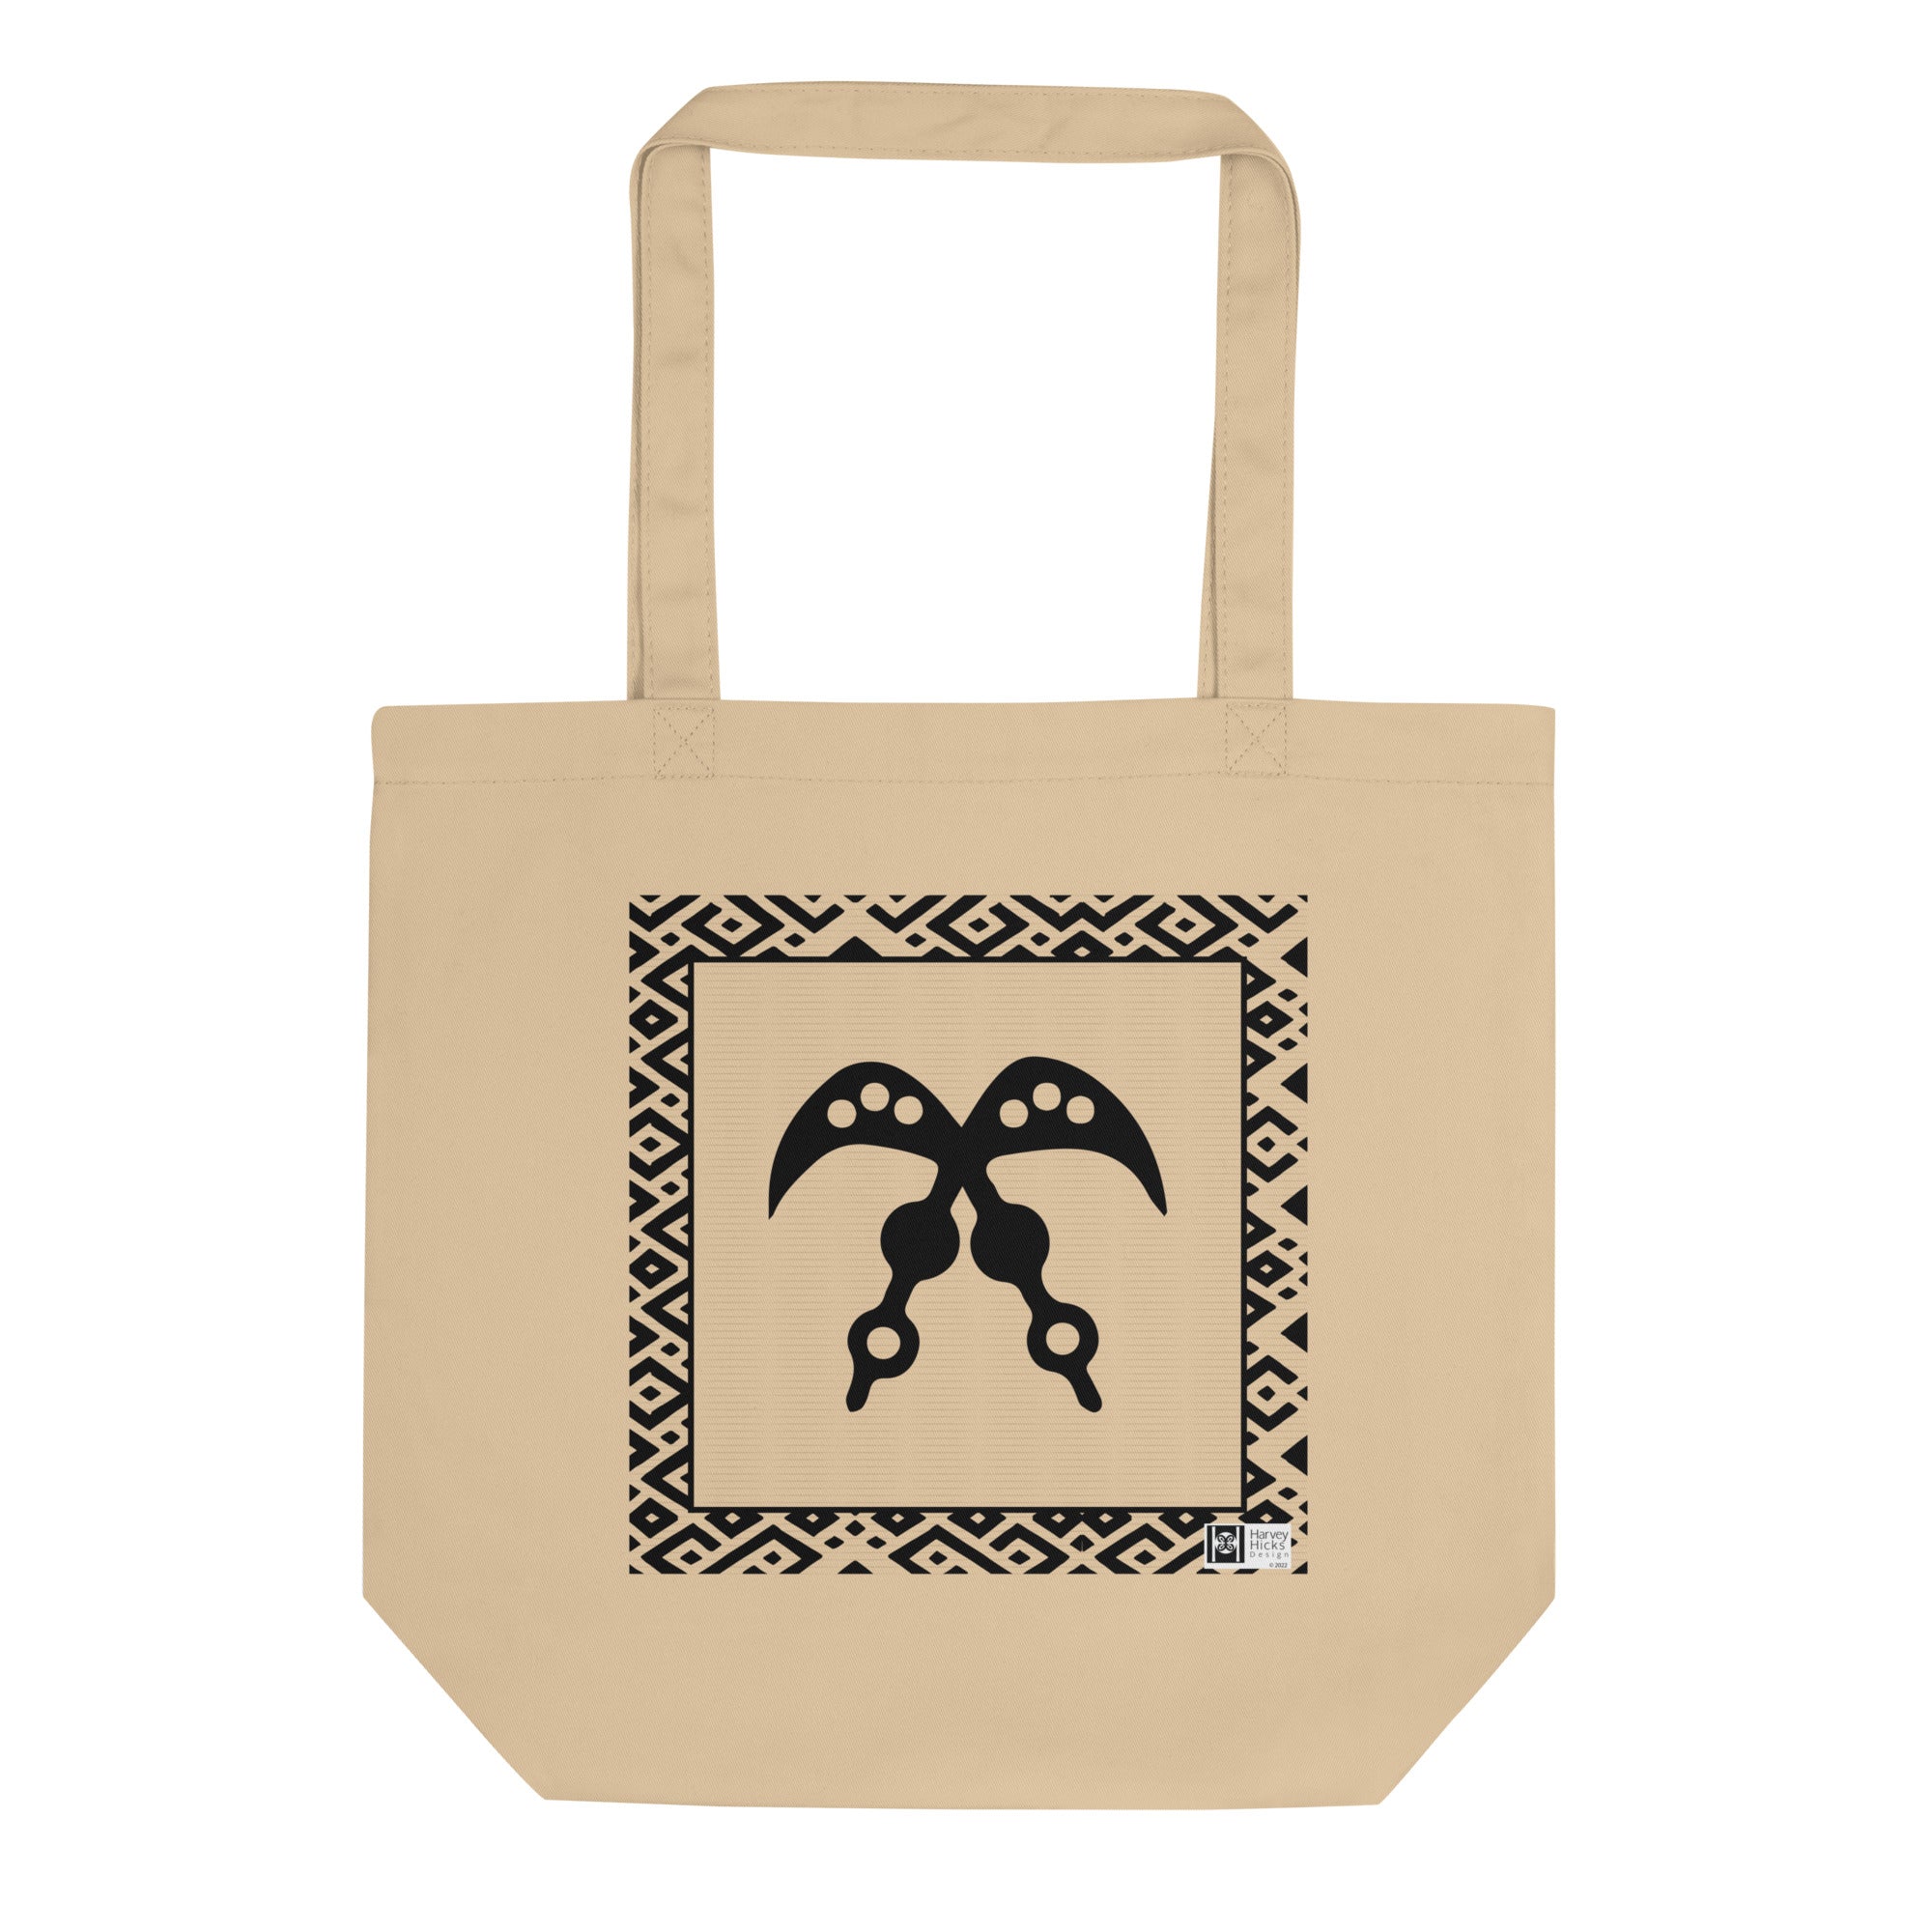 100% cotton Eco Tote Bag, featuring the Adinkra symbol for heroic deeds, NO TEXT